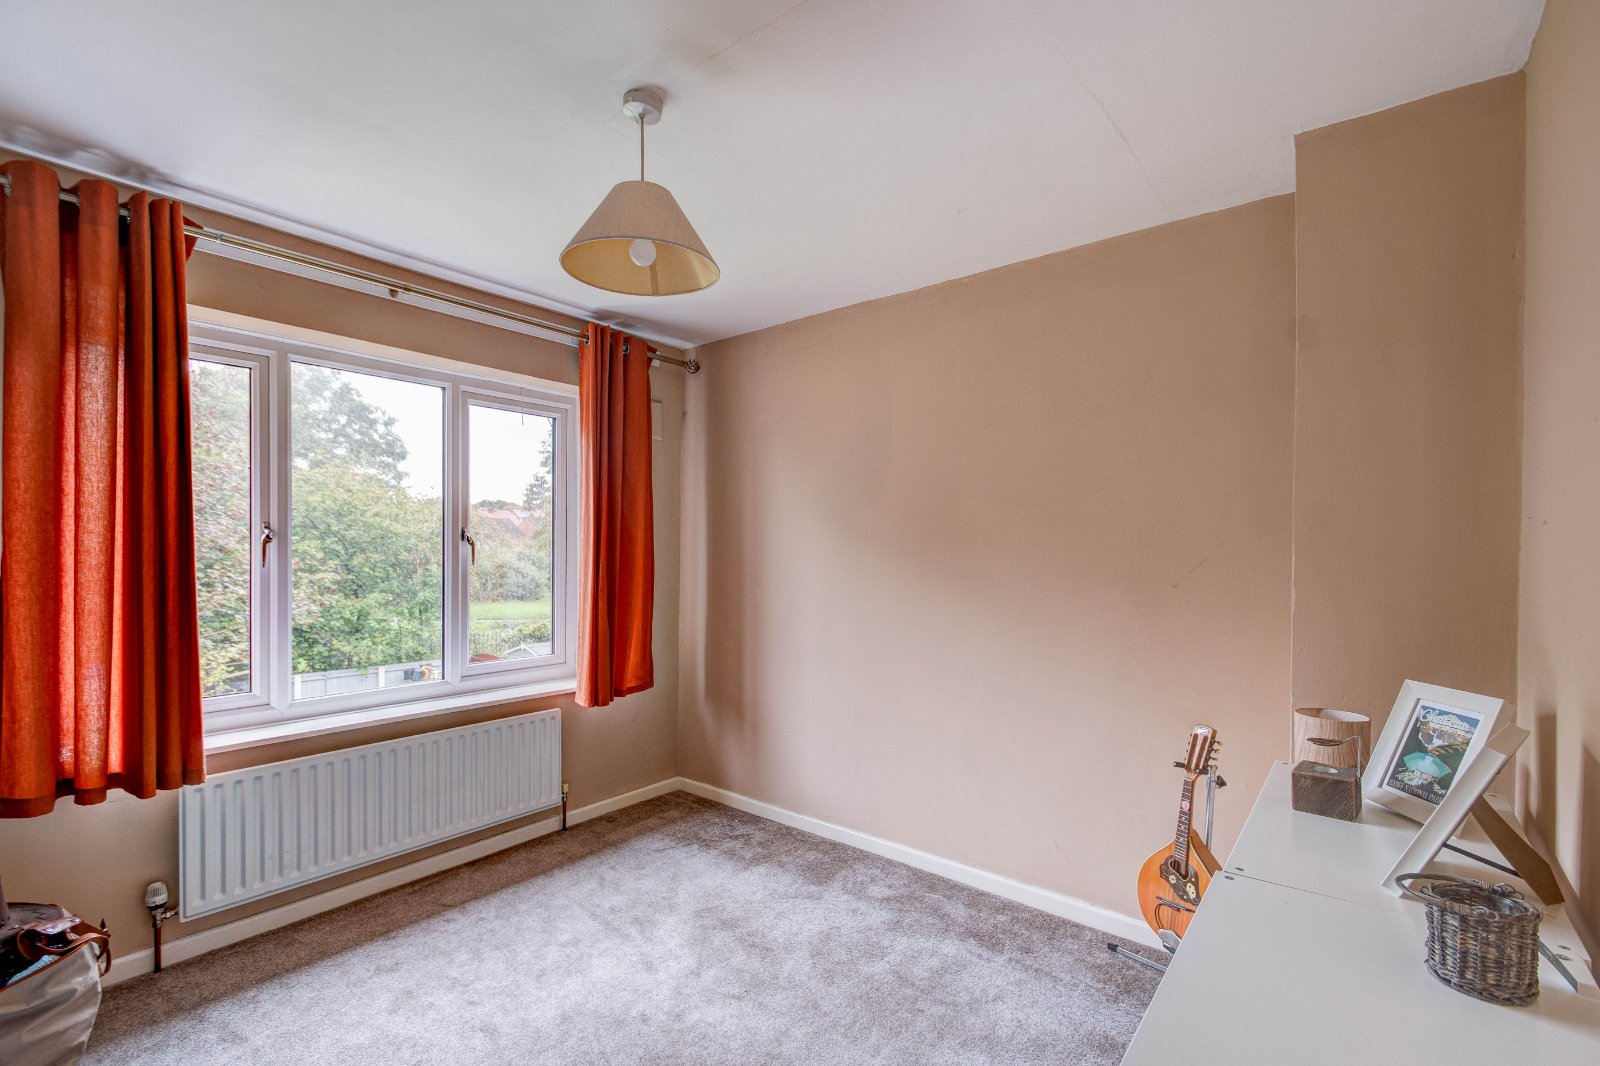 2 bed house for sale in Dewberry Road, Stourbridge 10